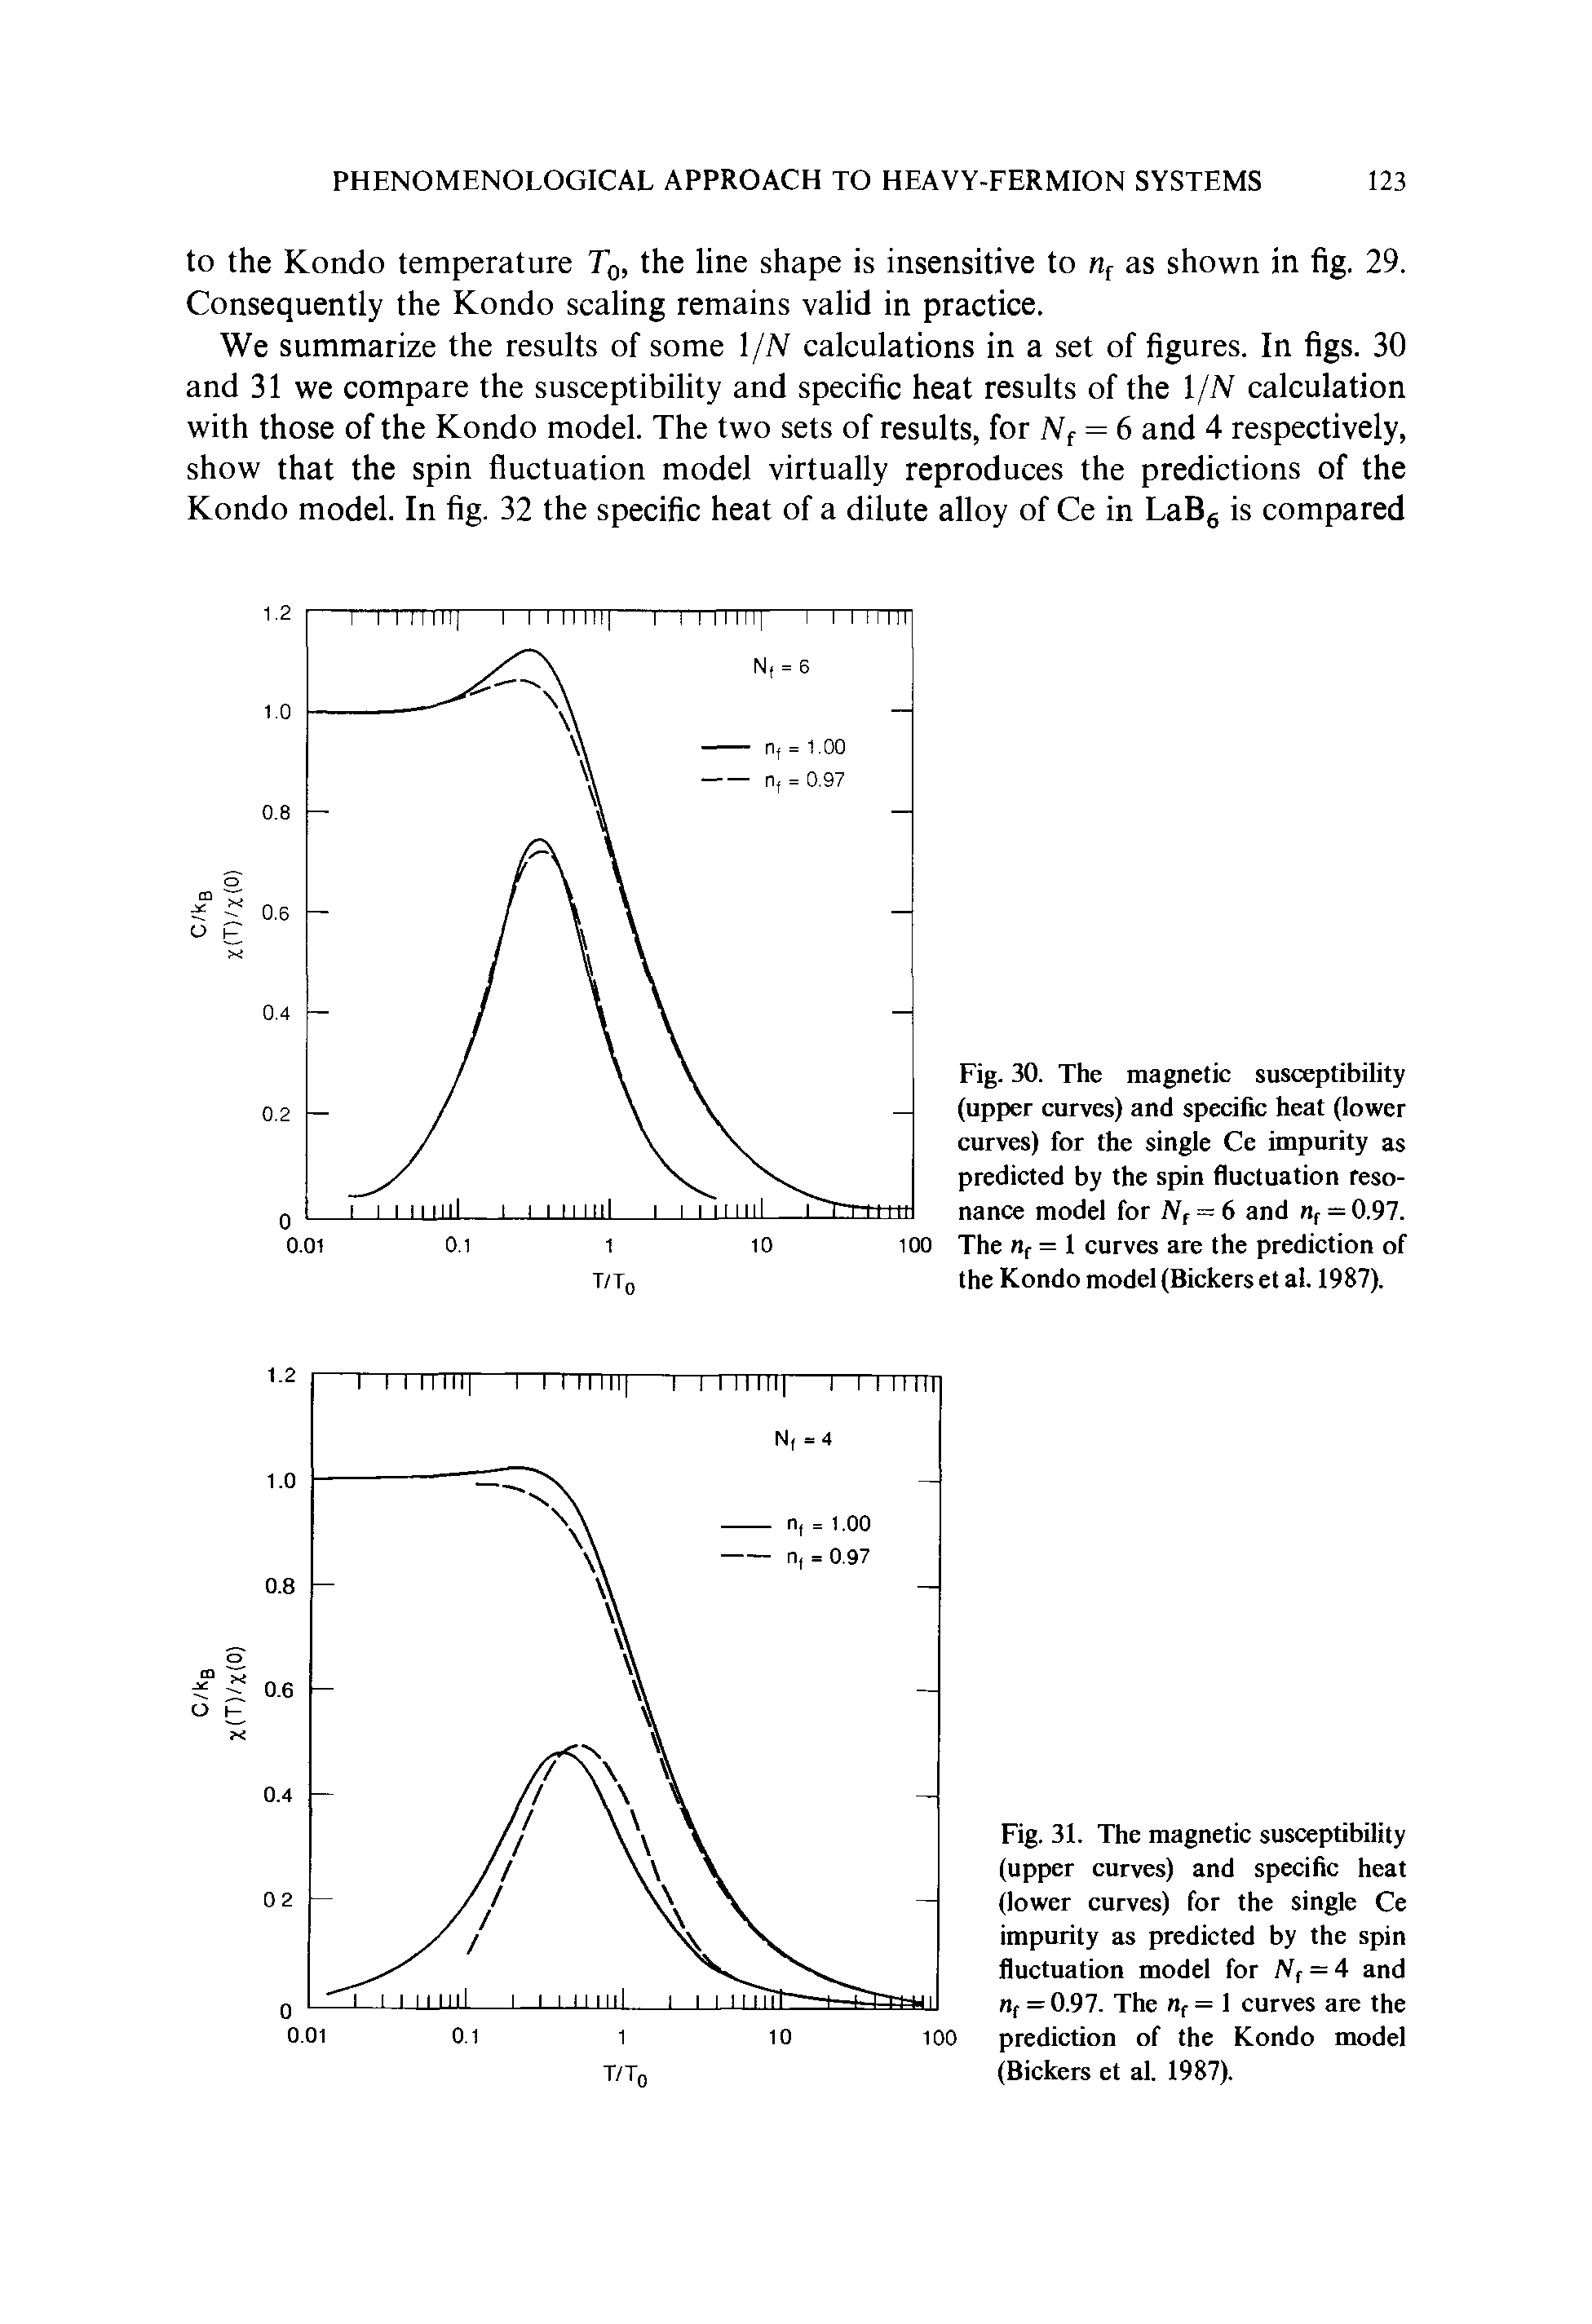 Fig. 31. The magnetic susceptibility (upper curves) and specific heat (lower curves) for the single Ce impurity as predicted by the spin fluctuation model for N, = 4 and n, = 0.97. The = 1 curves are the...